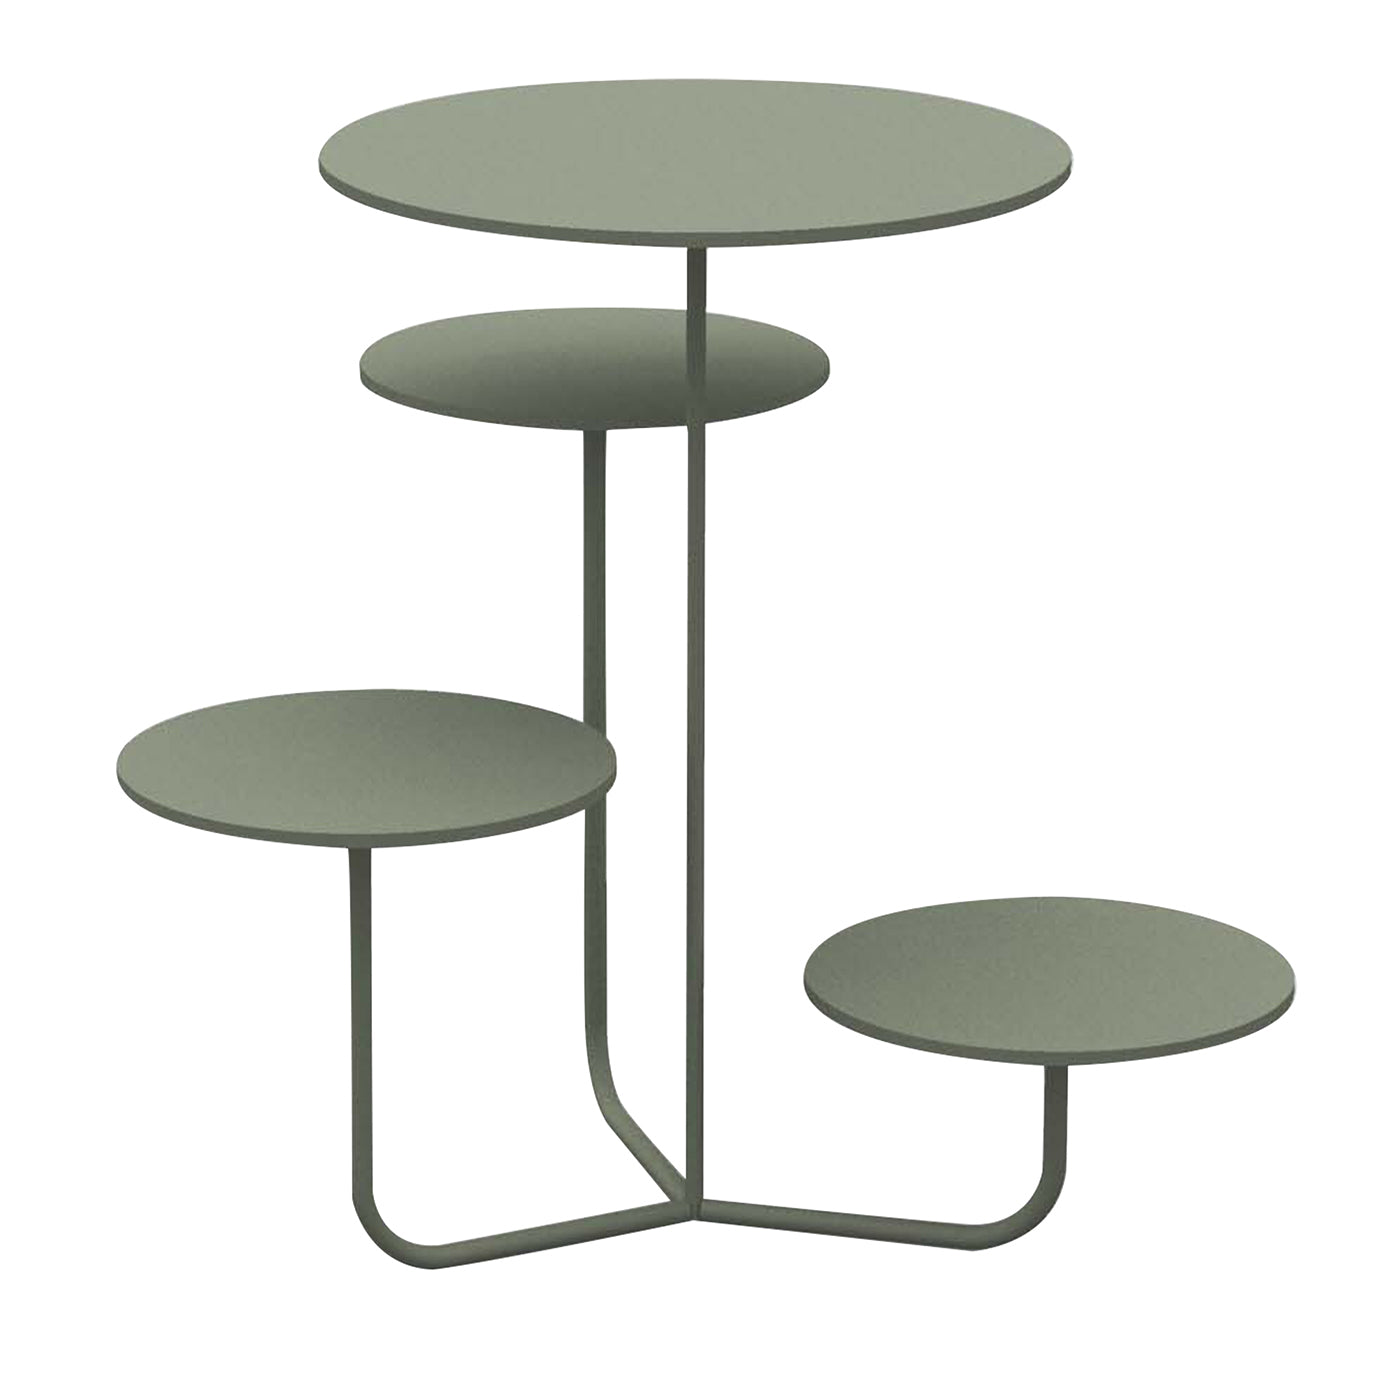 Condiviso 4-Tier Sage Green Serving Stand - Main view